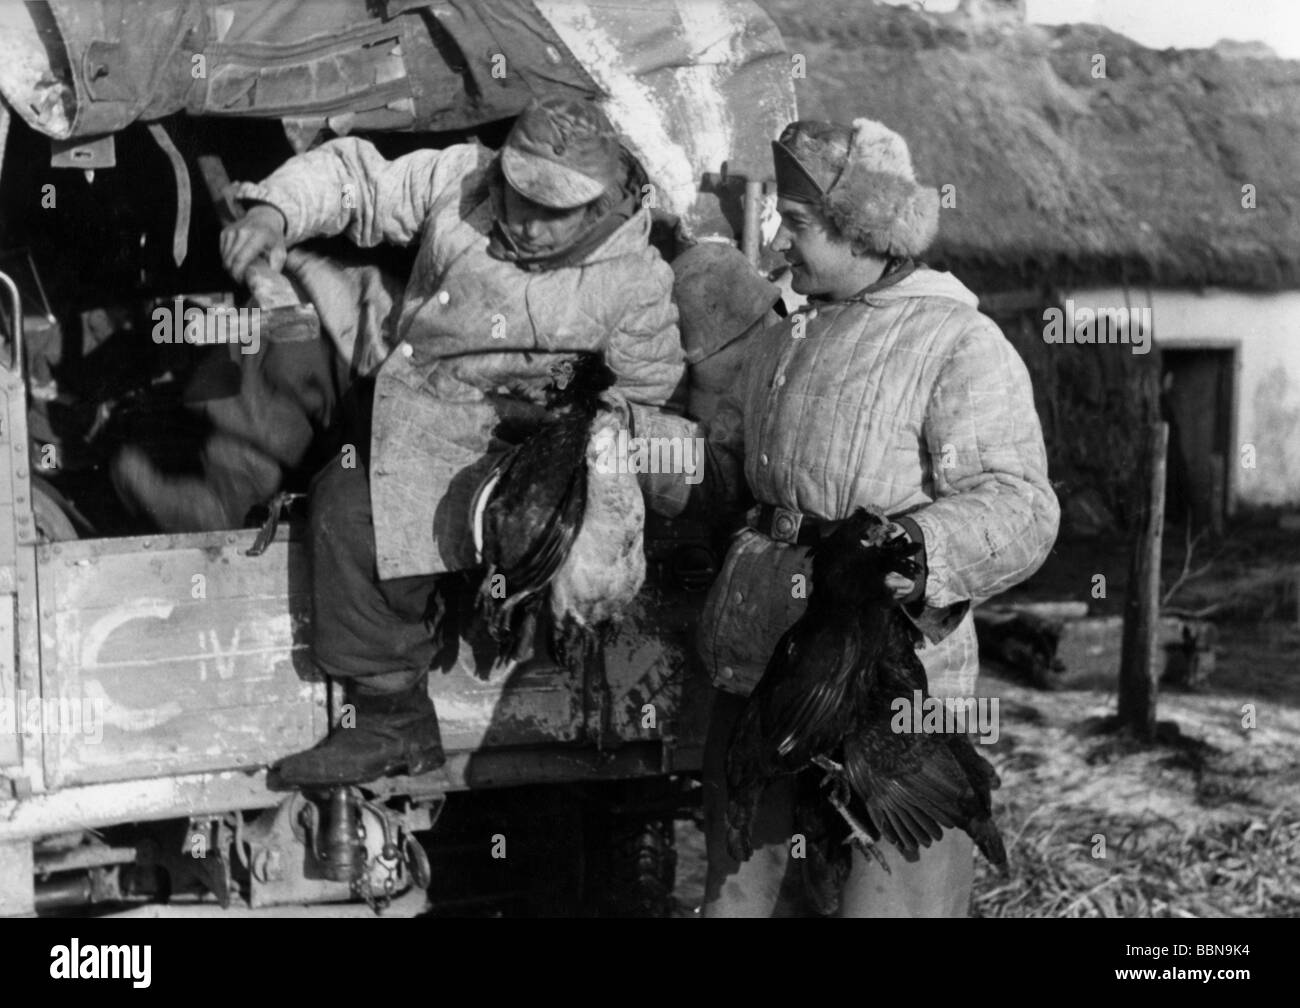 events, Second World War / WWII, Russia 1944 / 1945, German soldiers in the captured village of Britskoye, Ukraine, with caught chickens, 24.1.1944, Wehrmacht, Eastern Front, Soviet Union, USSR, 20th century, historic, historical, Third Reich, winter clothing, lorry, axe, people, 1940s, Stock Photo